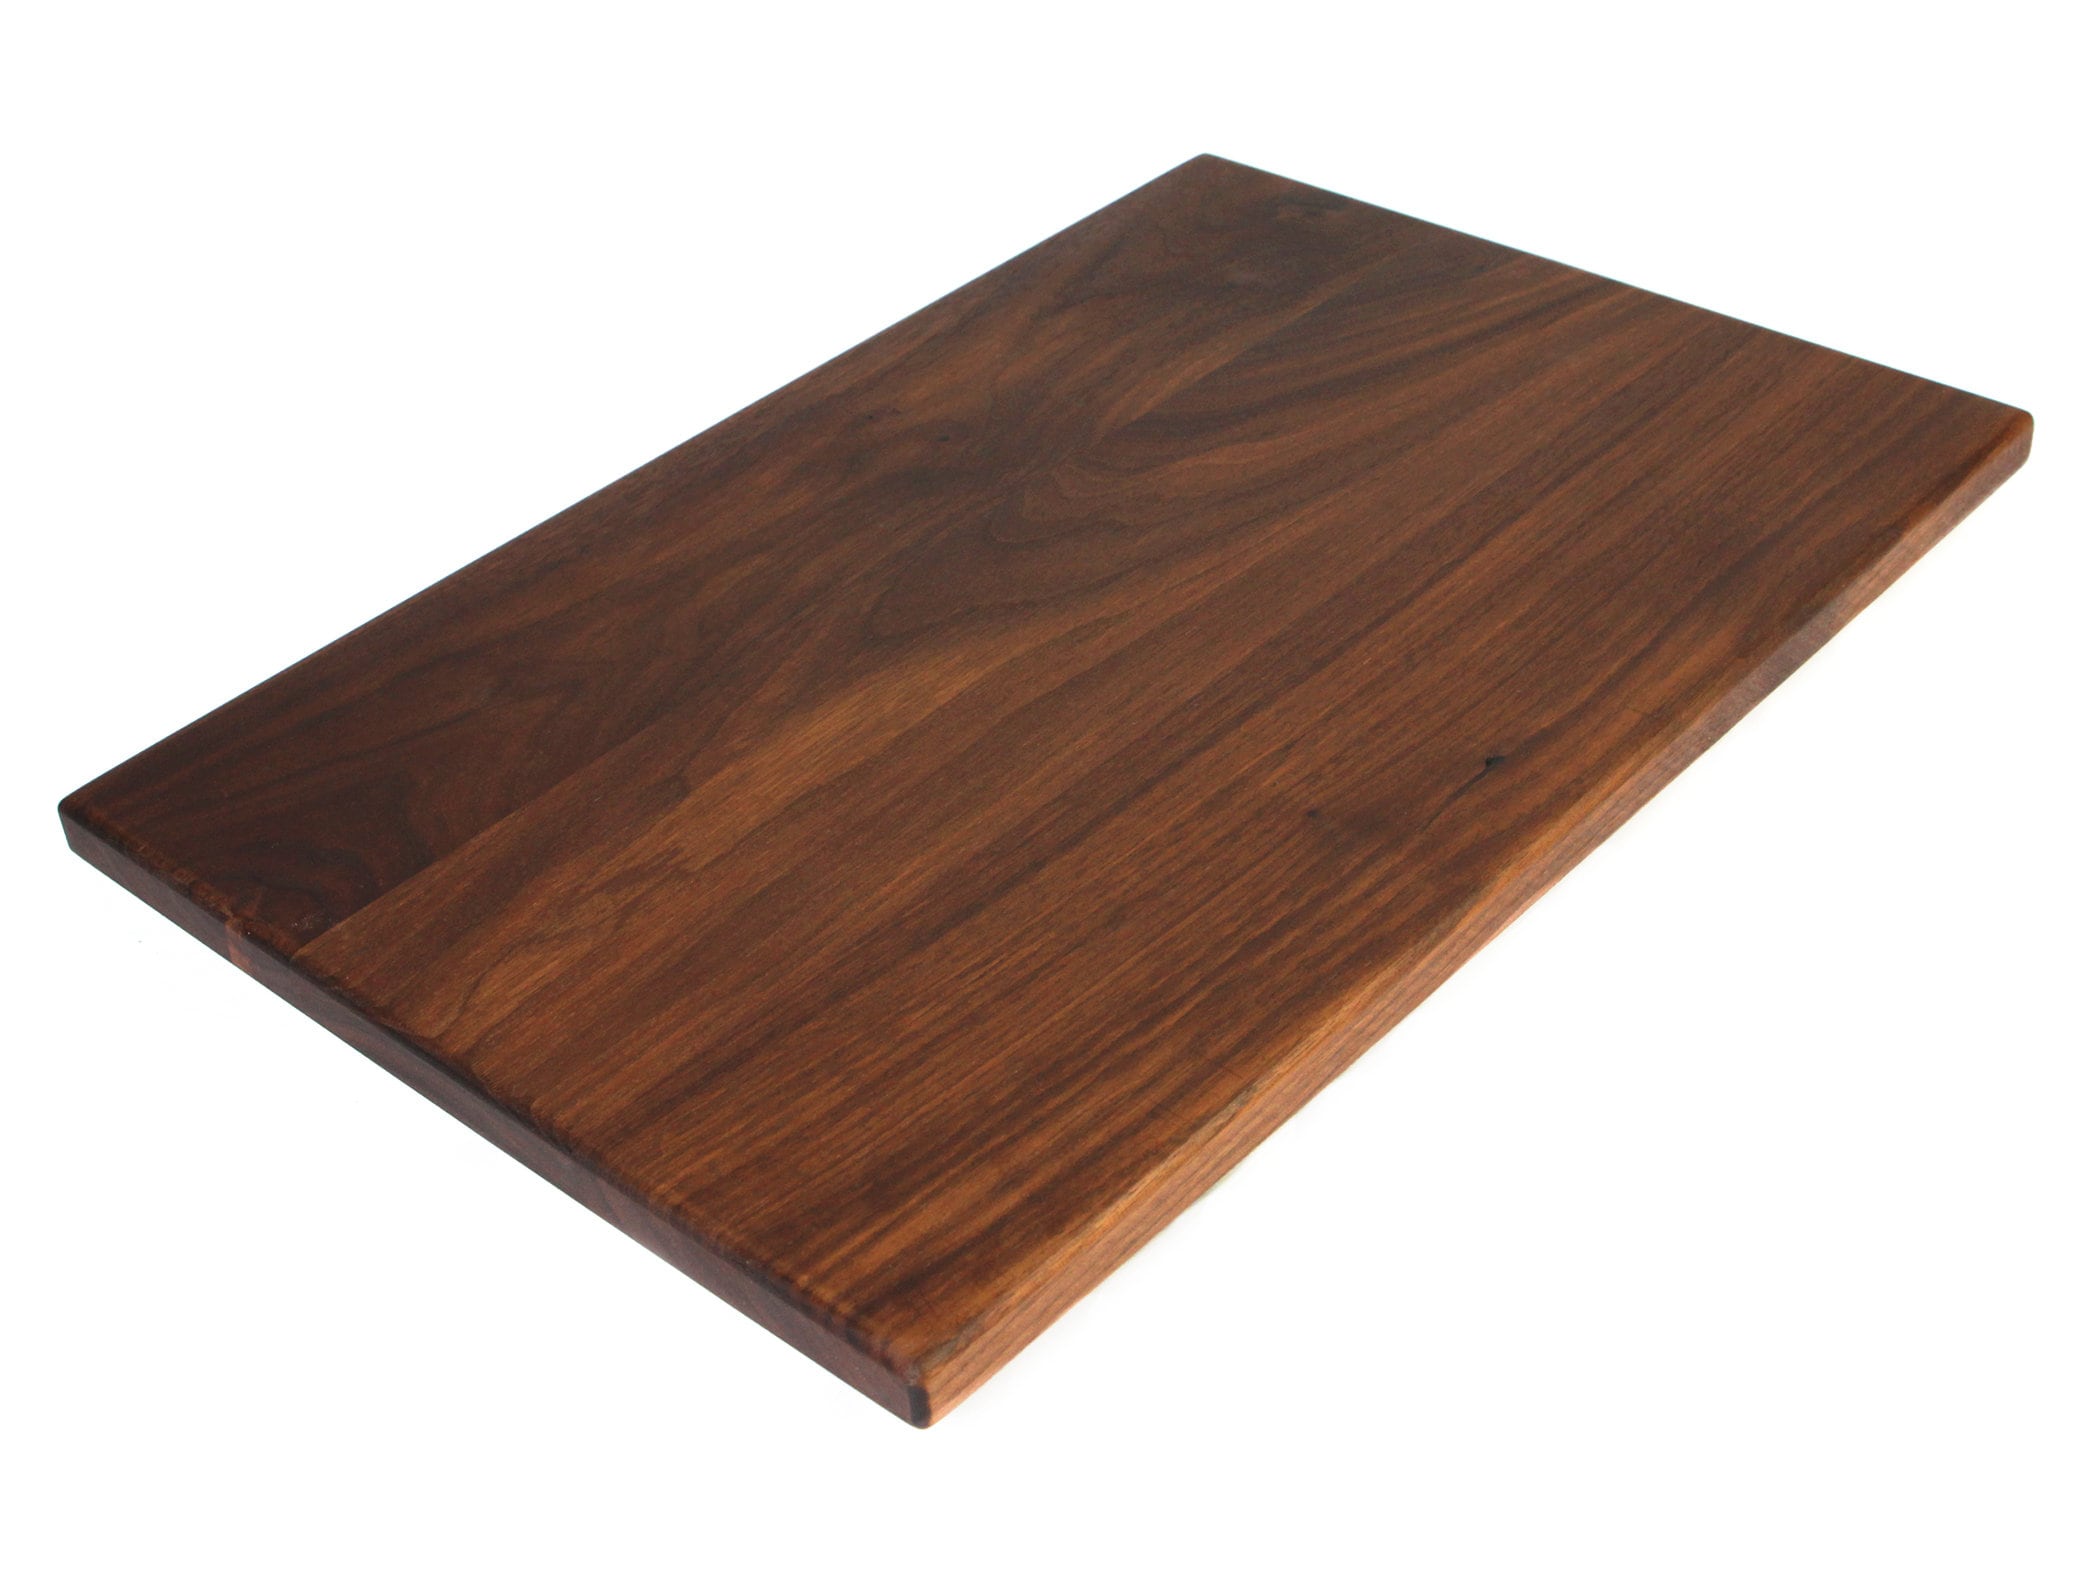 Large Wood Cutting Board 18x12 inch - Wooden Chopping Board for Kitchen  with Juice Groove, 1 - Kroger